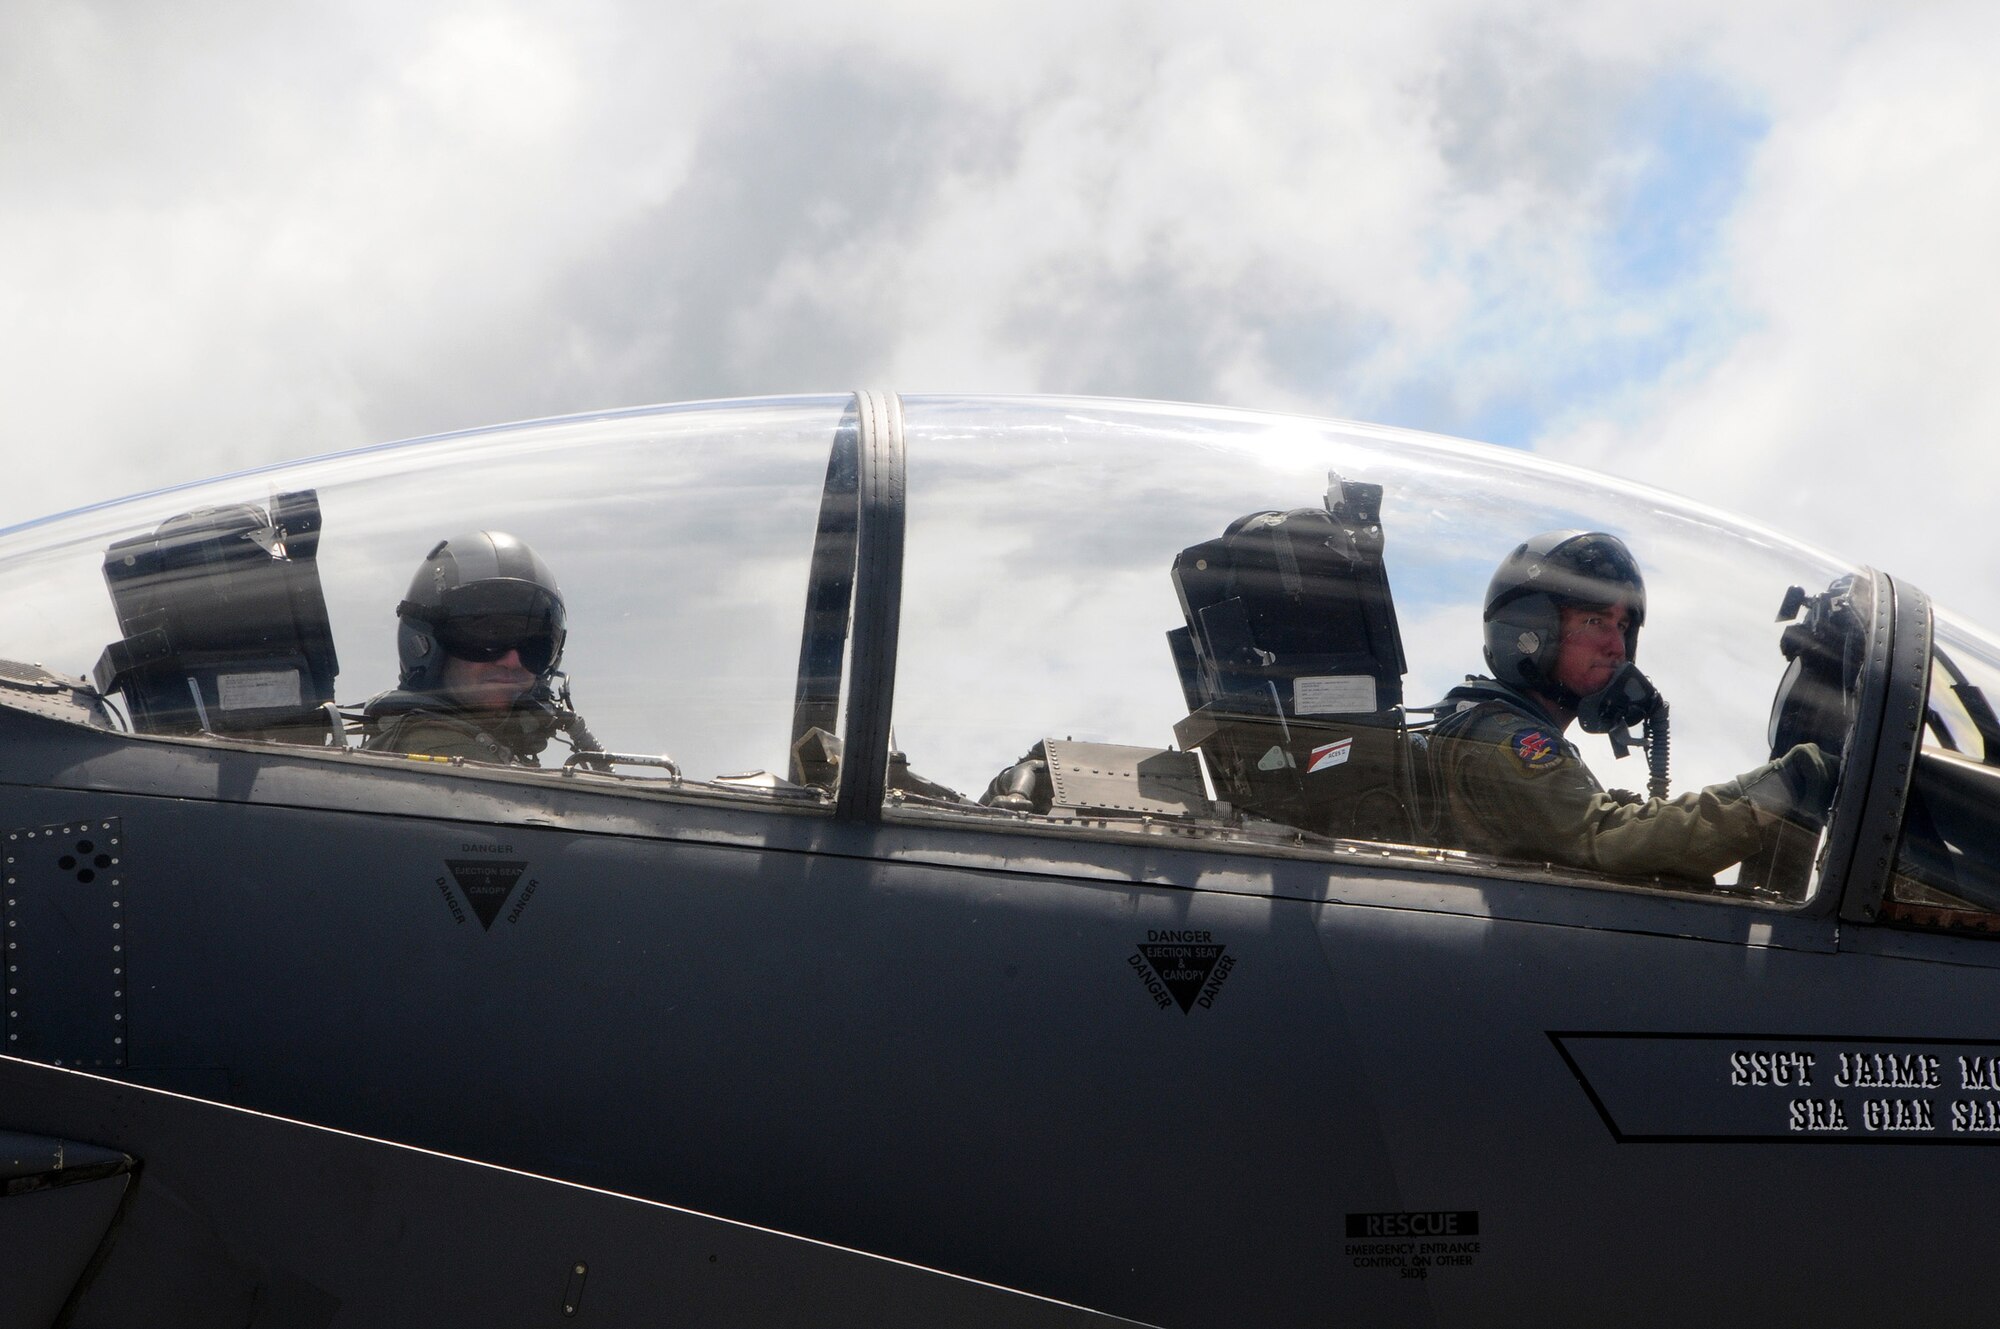 ANDERSEN AIR FORCE BASE, Guam - Brigadier Gen. Doug Owens, 36th Wing commander,and Major Christopher Eberle, 389th Fighter Squadron F-15E Strike Eagle pilot, make last-minute preparations before taking off on the general's final flight here Aug. 26. Under his command, the 36th WG has undergone many changes, including the incorporation of the Global Hawk mission here. (U.S. Air Force photo by Airman 1st Class Courtney Witt)